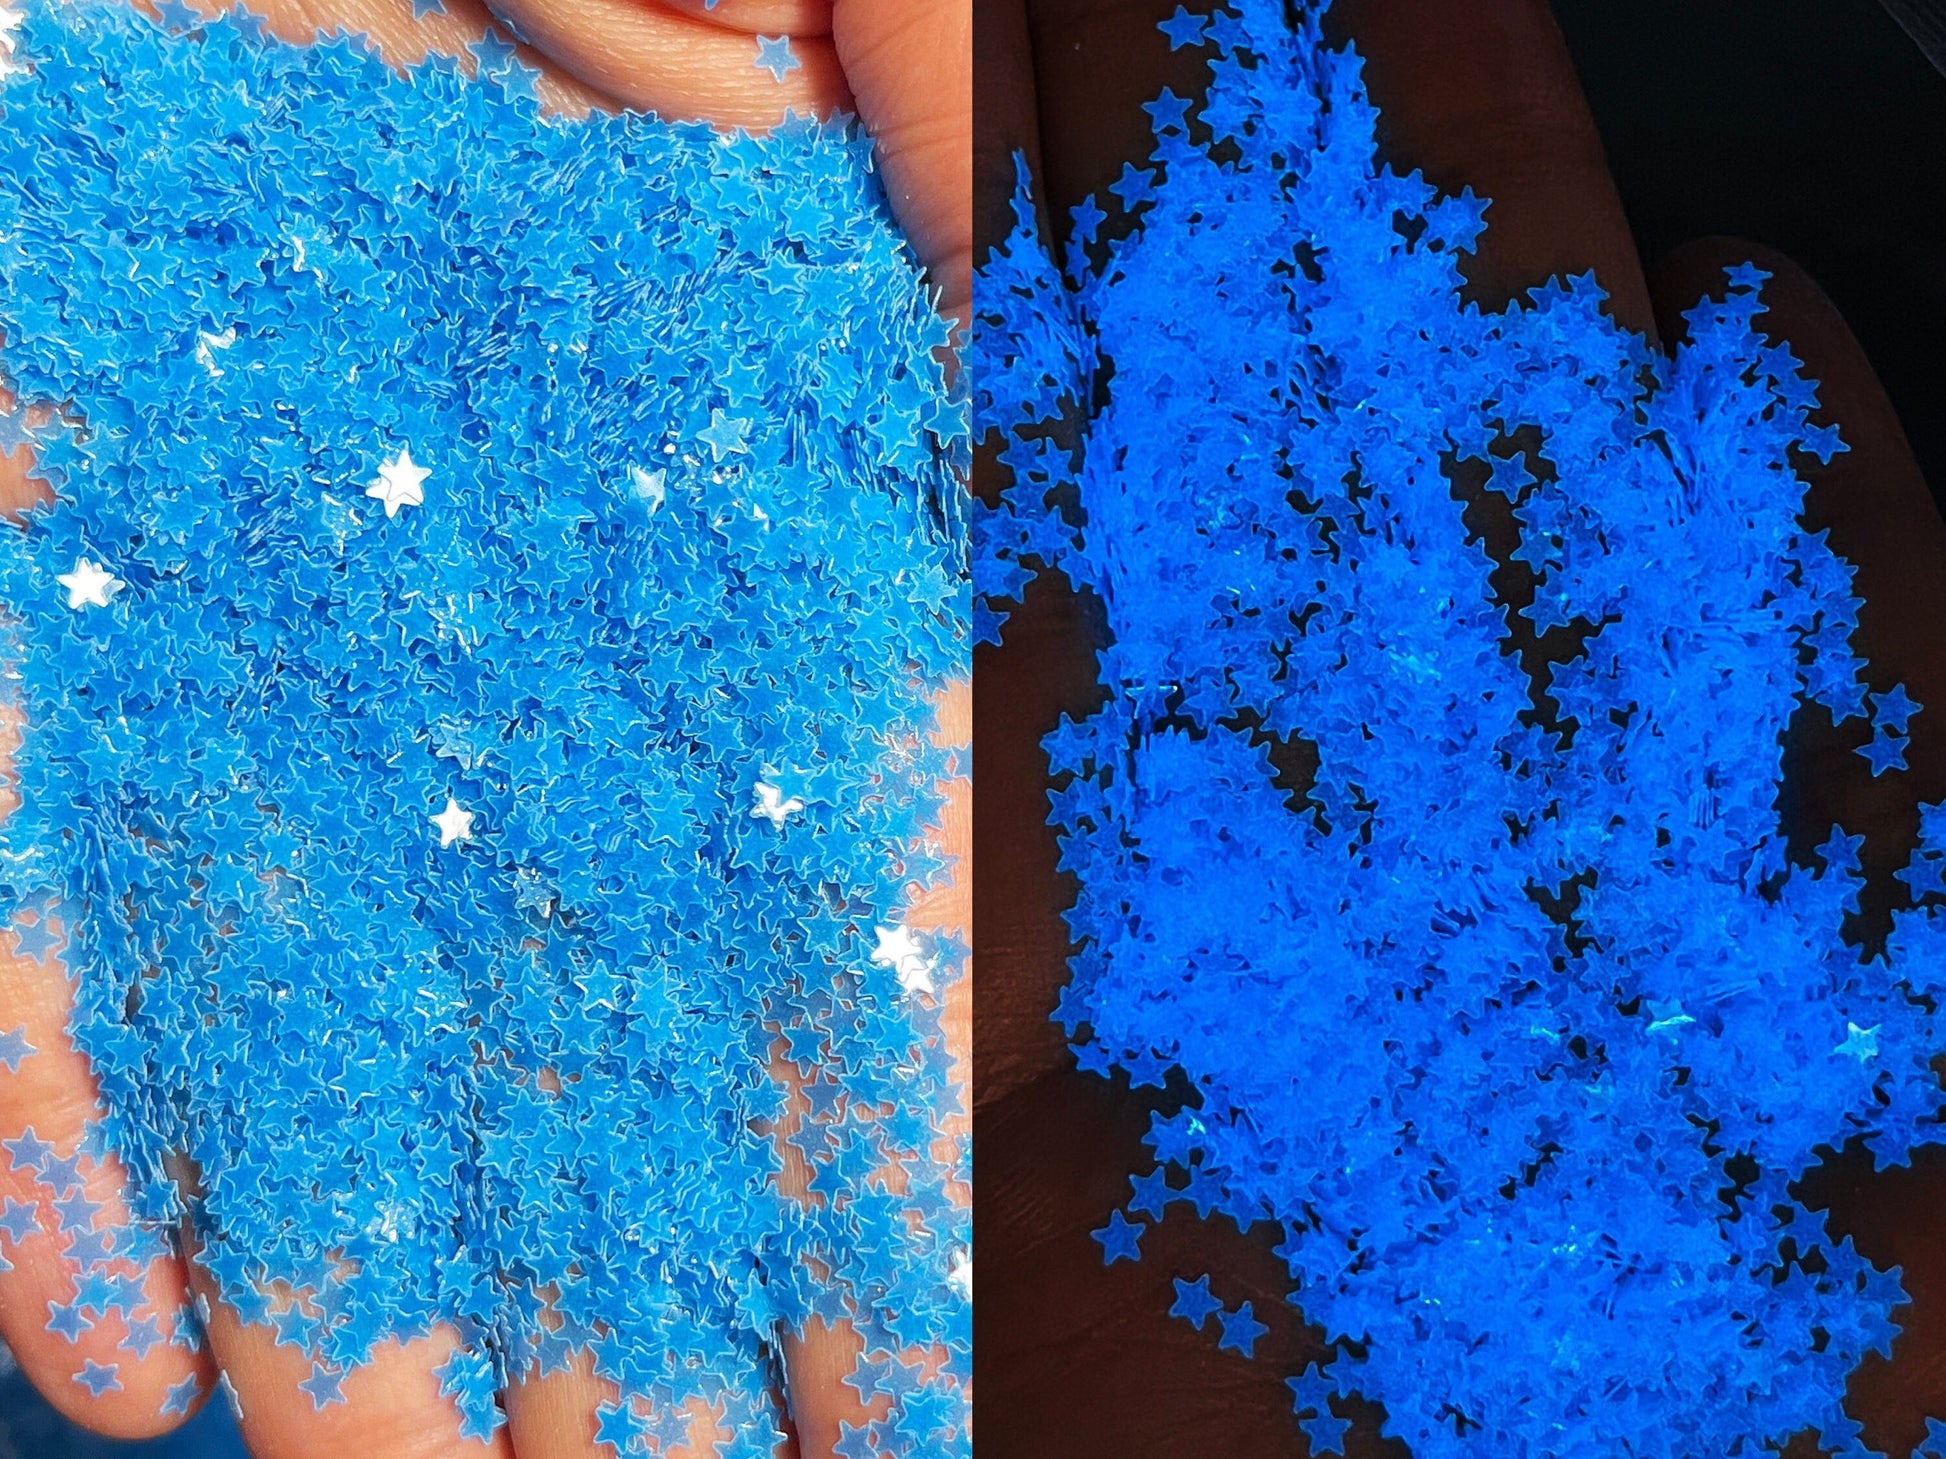 Noctilucent Nail Flakes/ Star Glow In The Dark Powder Fluorescent Luminescent Nail Art Pigment/ Glowing nail art flakes glitter